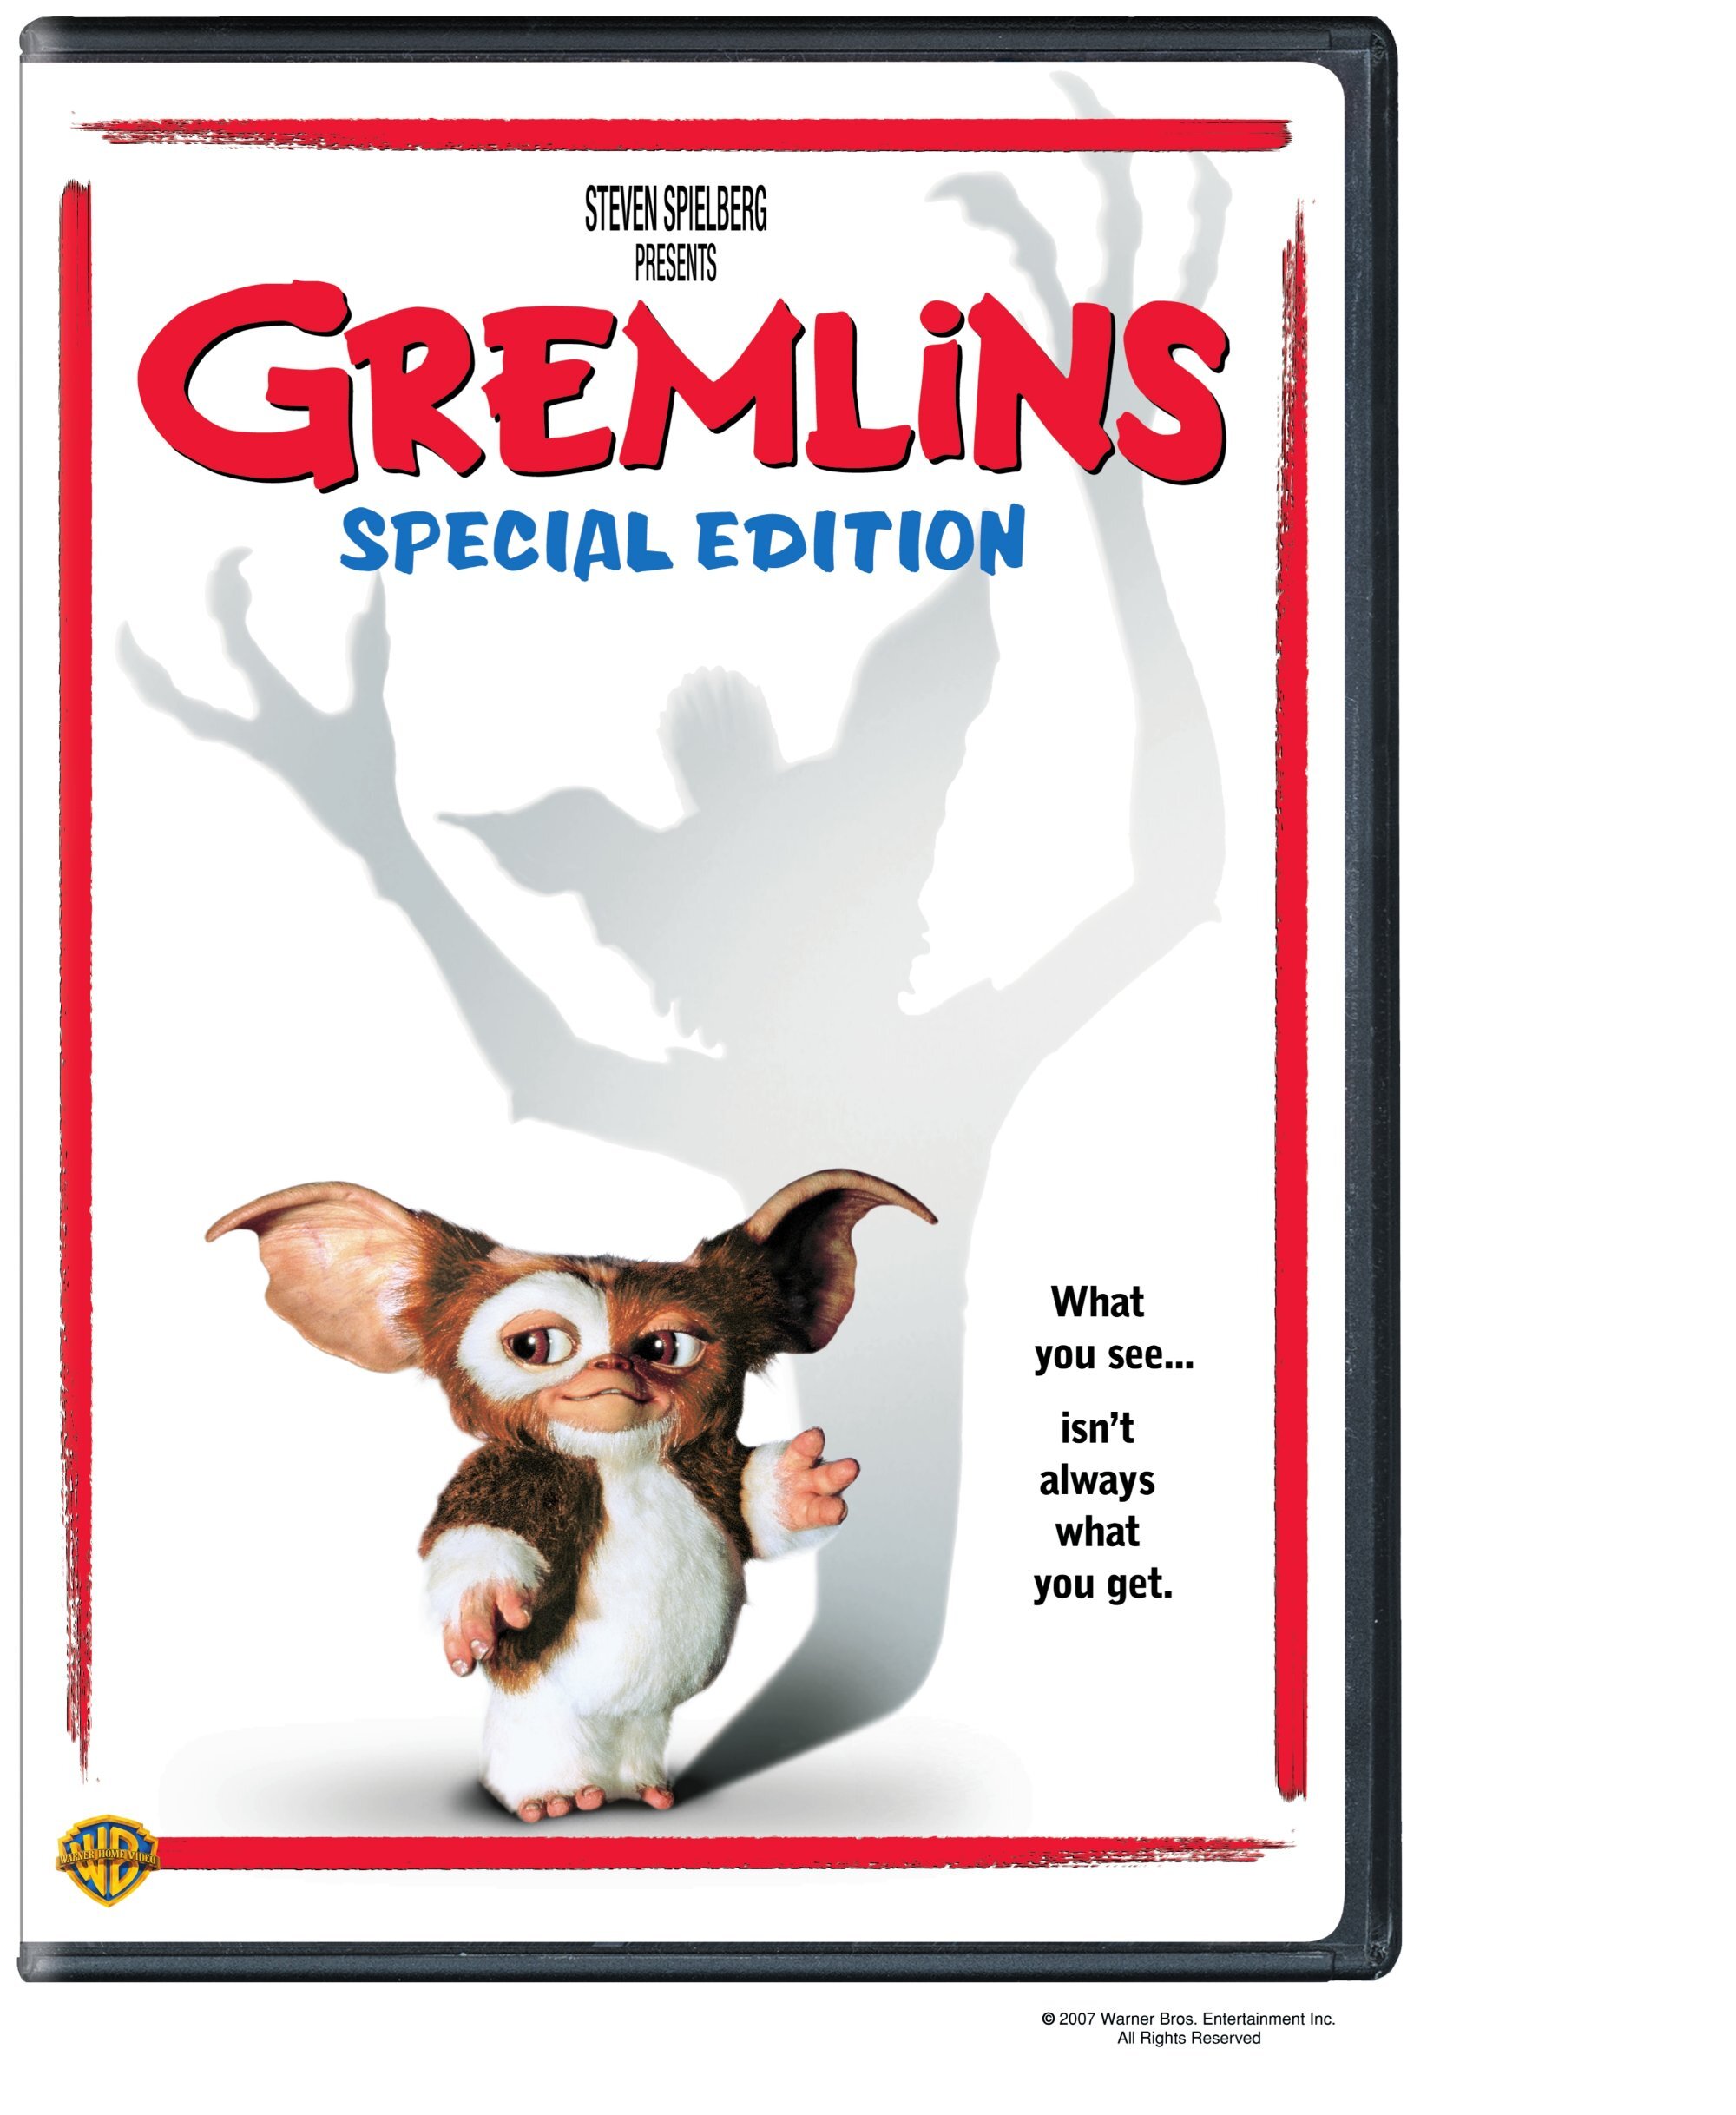 Gremlins (Special Edition) - DVD [ 1984 ]  - Comedy Movies On DVD - Movies On GRUV